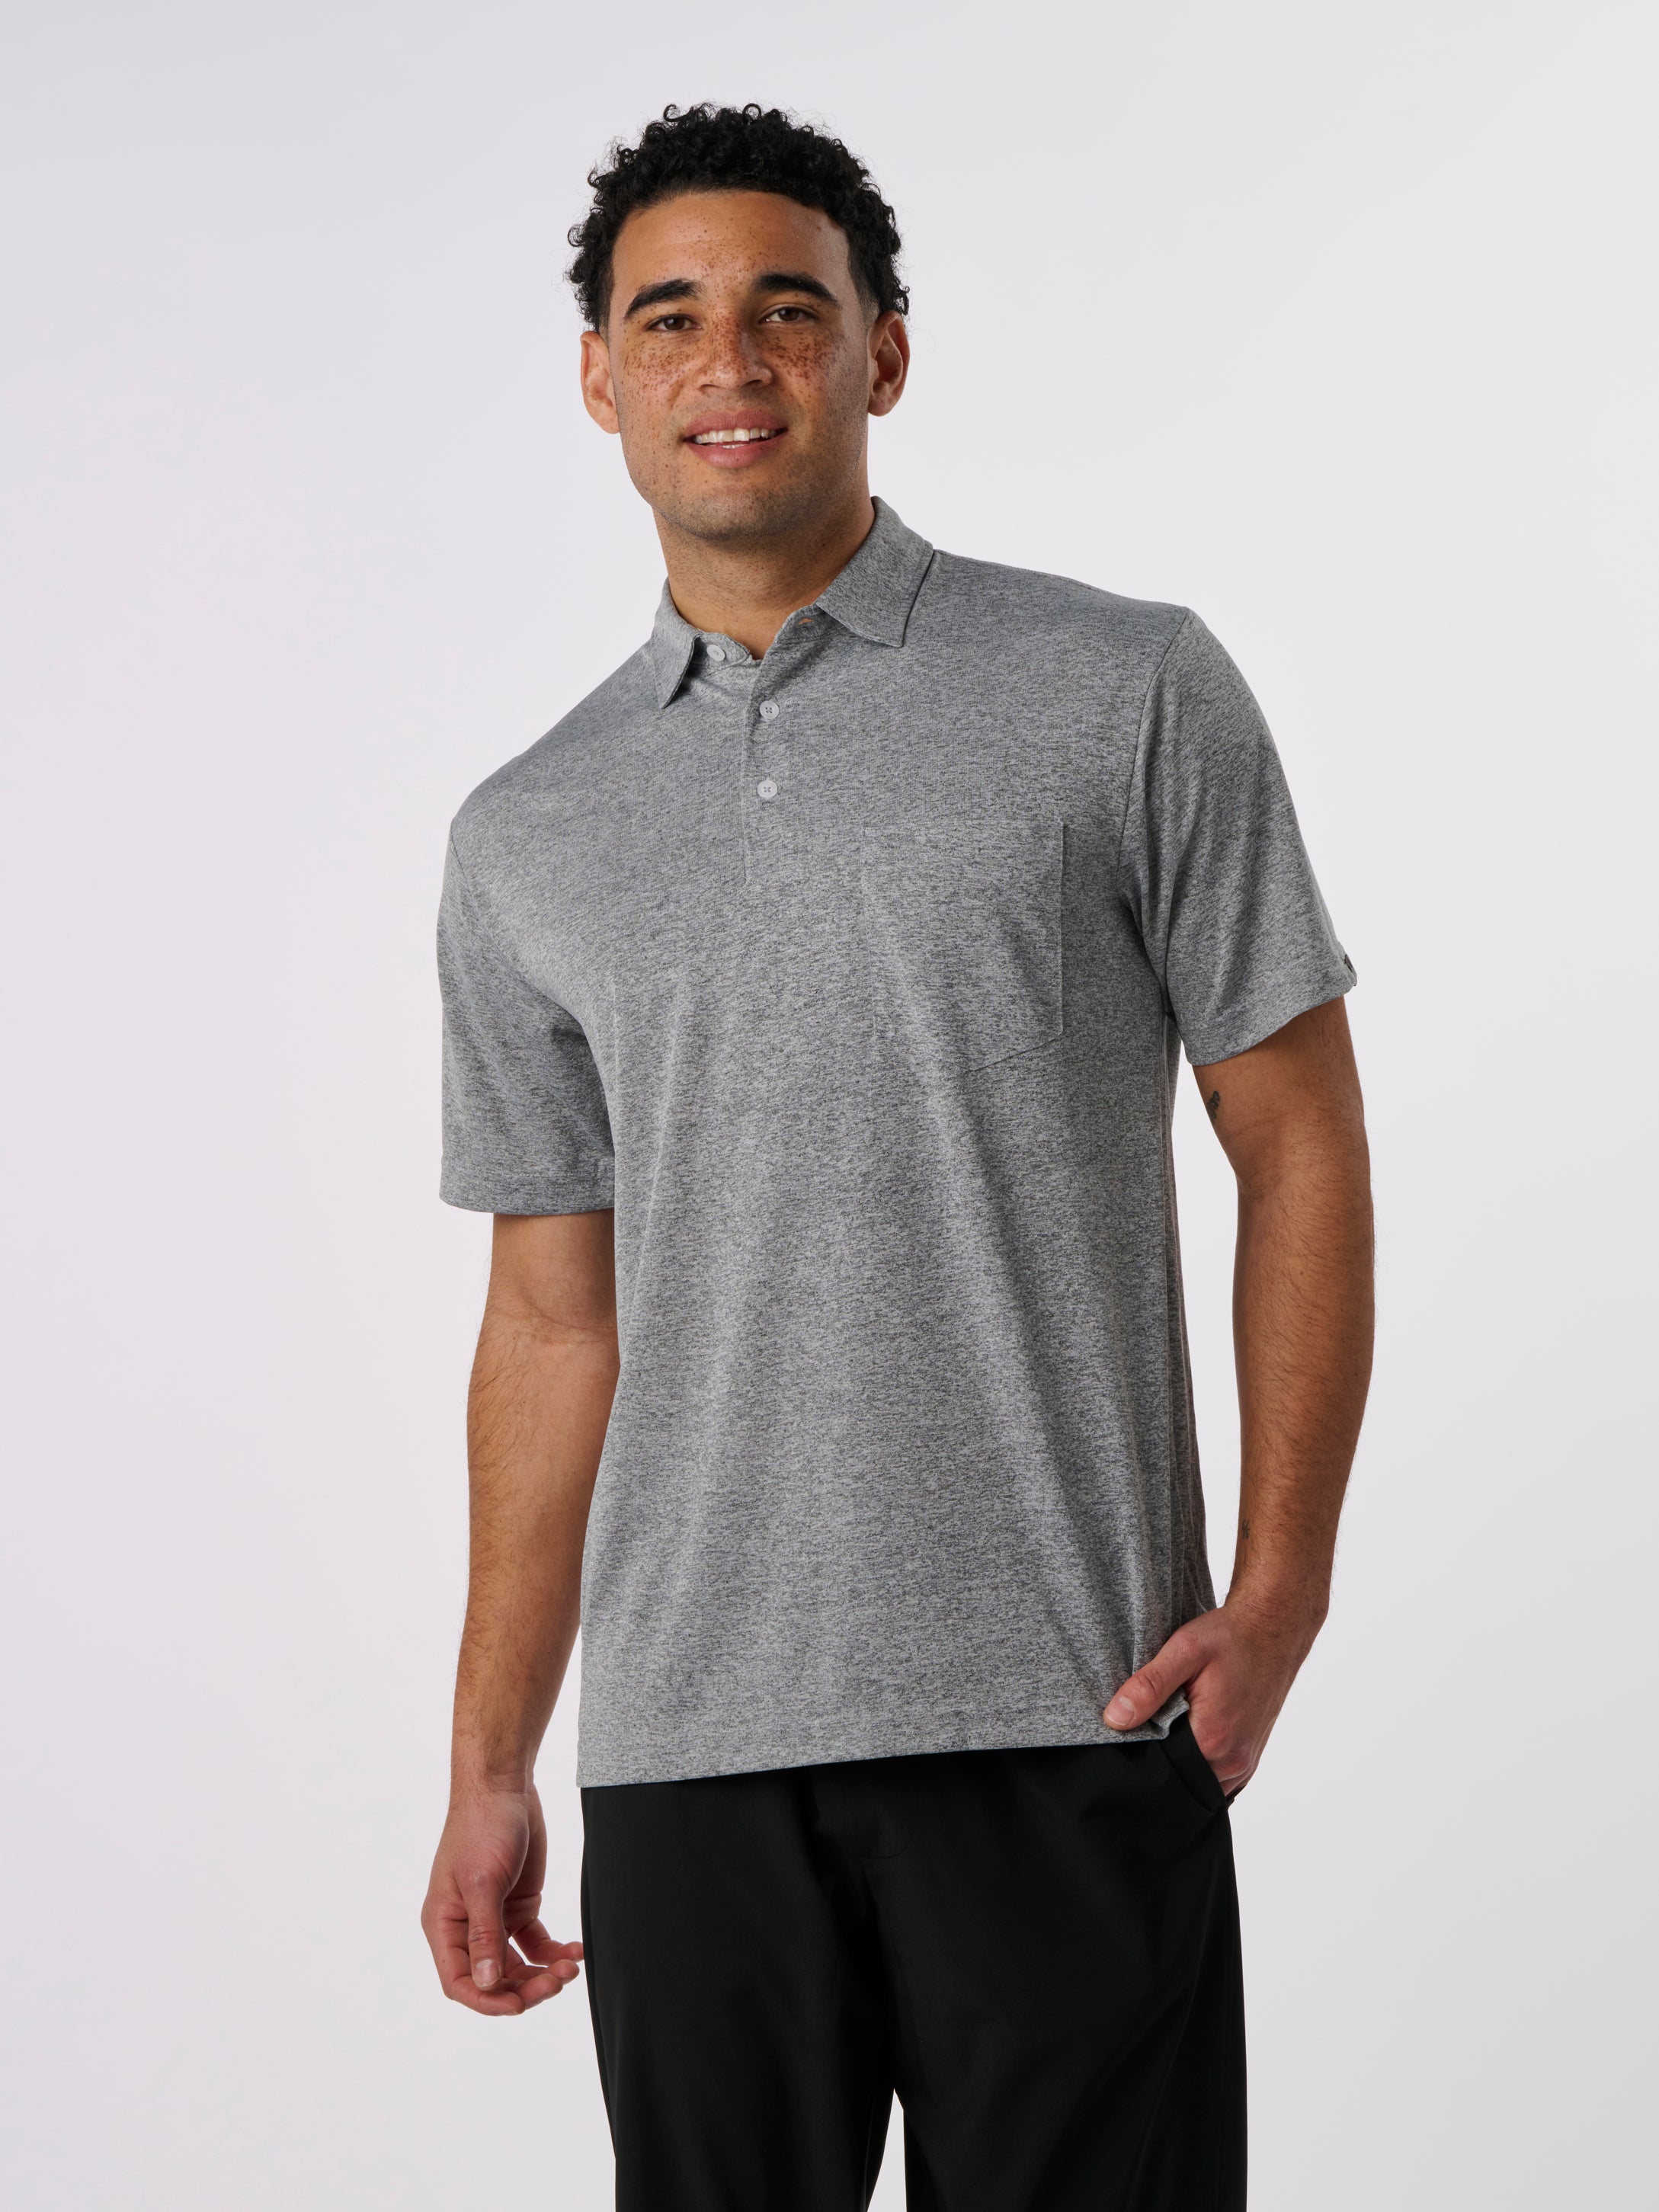 RECOVER_RD5000_SPORTPOLO_GREYHEATHER_FRONT.jpg